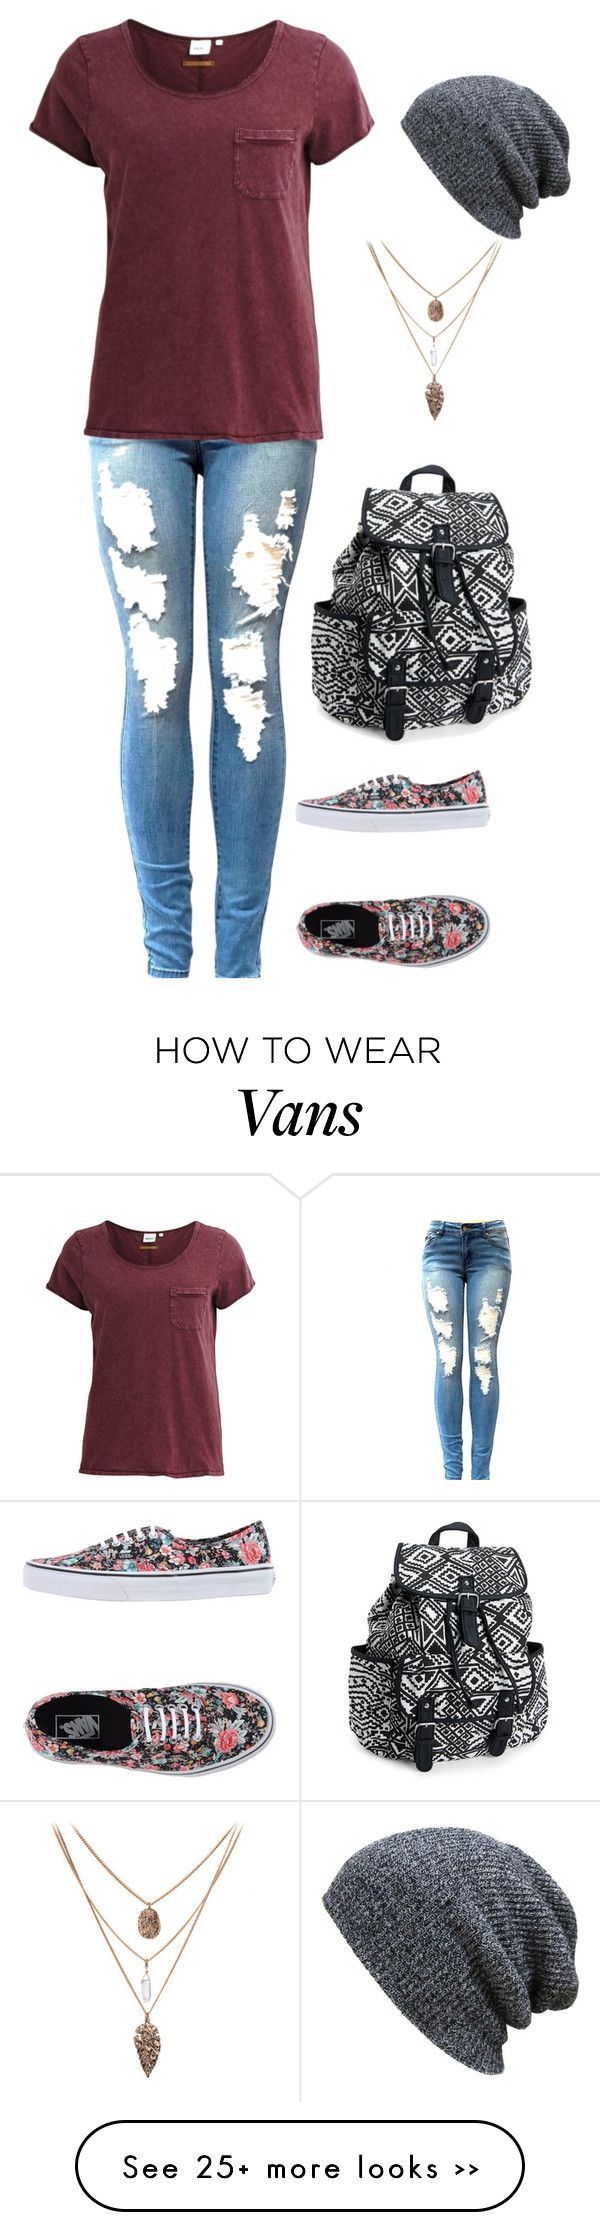 “Ugh, School” by lizzie-cockerham on Polyvore featuring Object Collectors Item, Vans and AÃ©ropostale